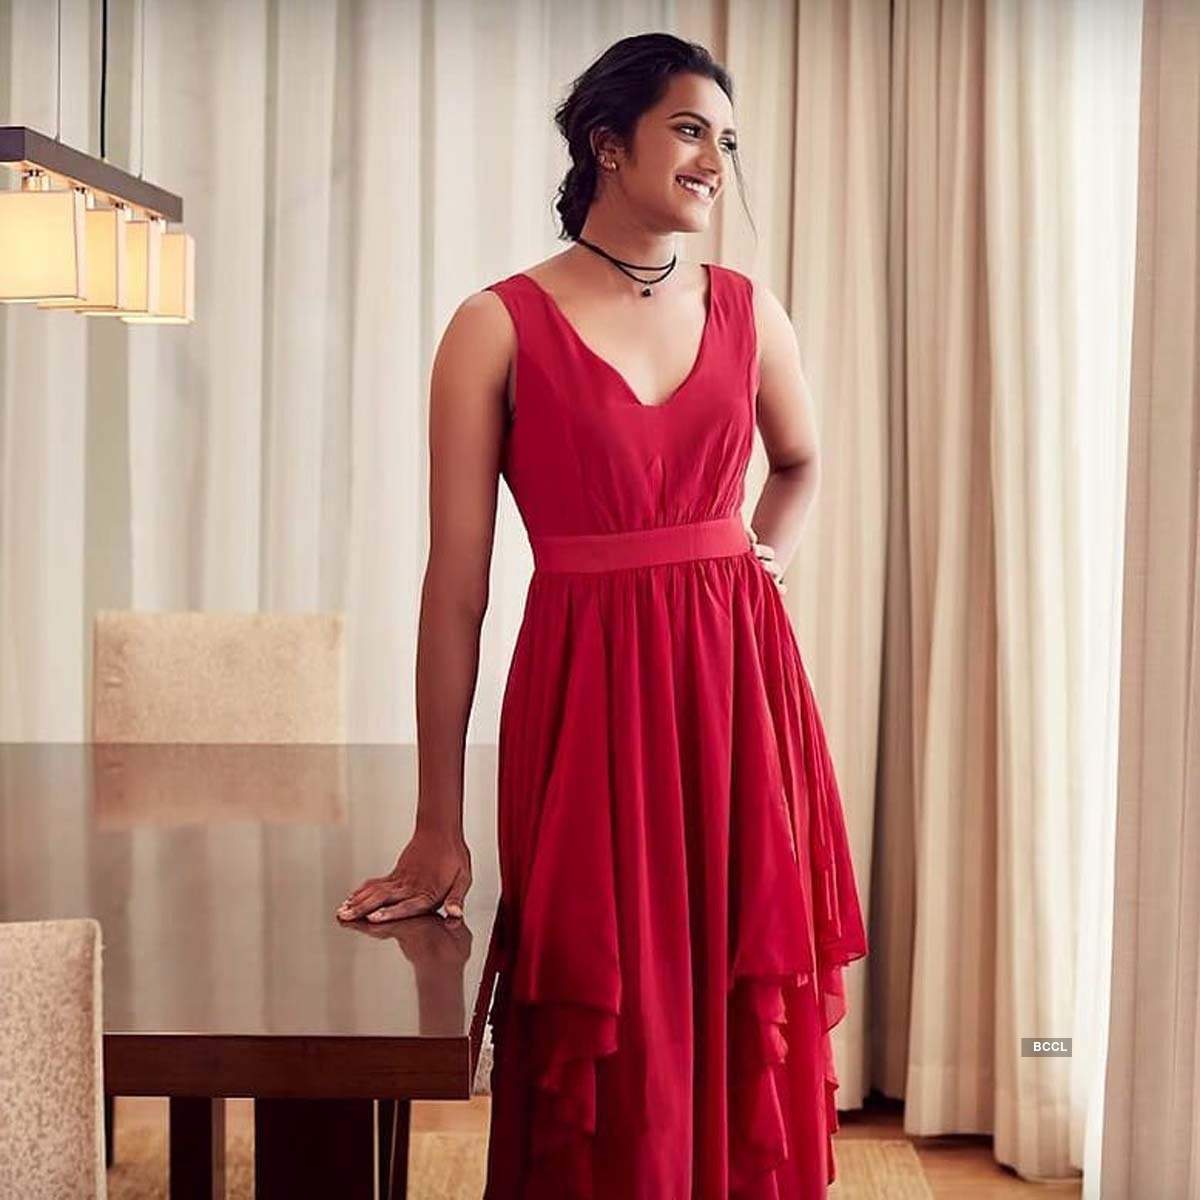 PV Sindhu shows off her fashion-savvy side in these stunning pictures